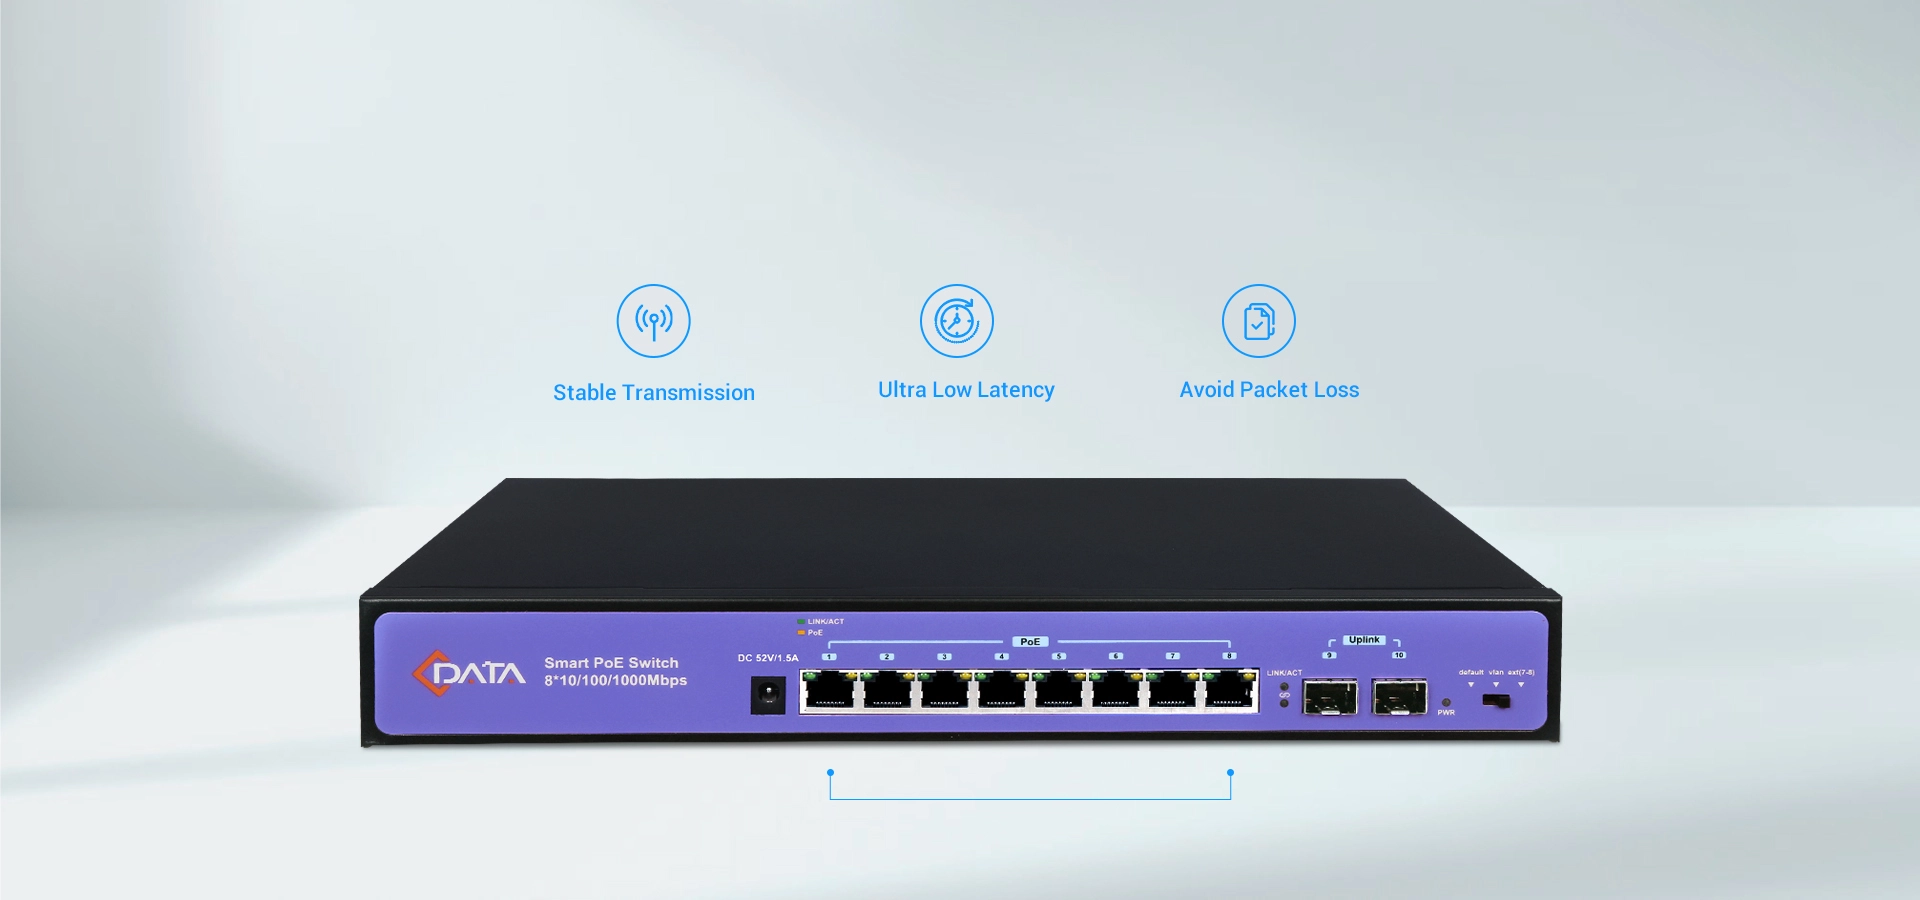 Eight-Core Ethernet Ports, Stable Transmission